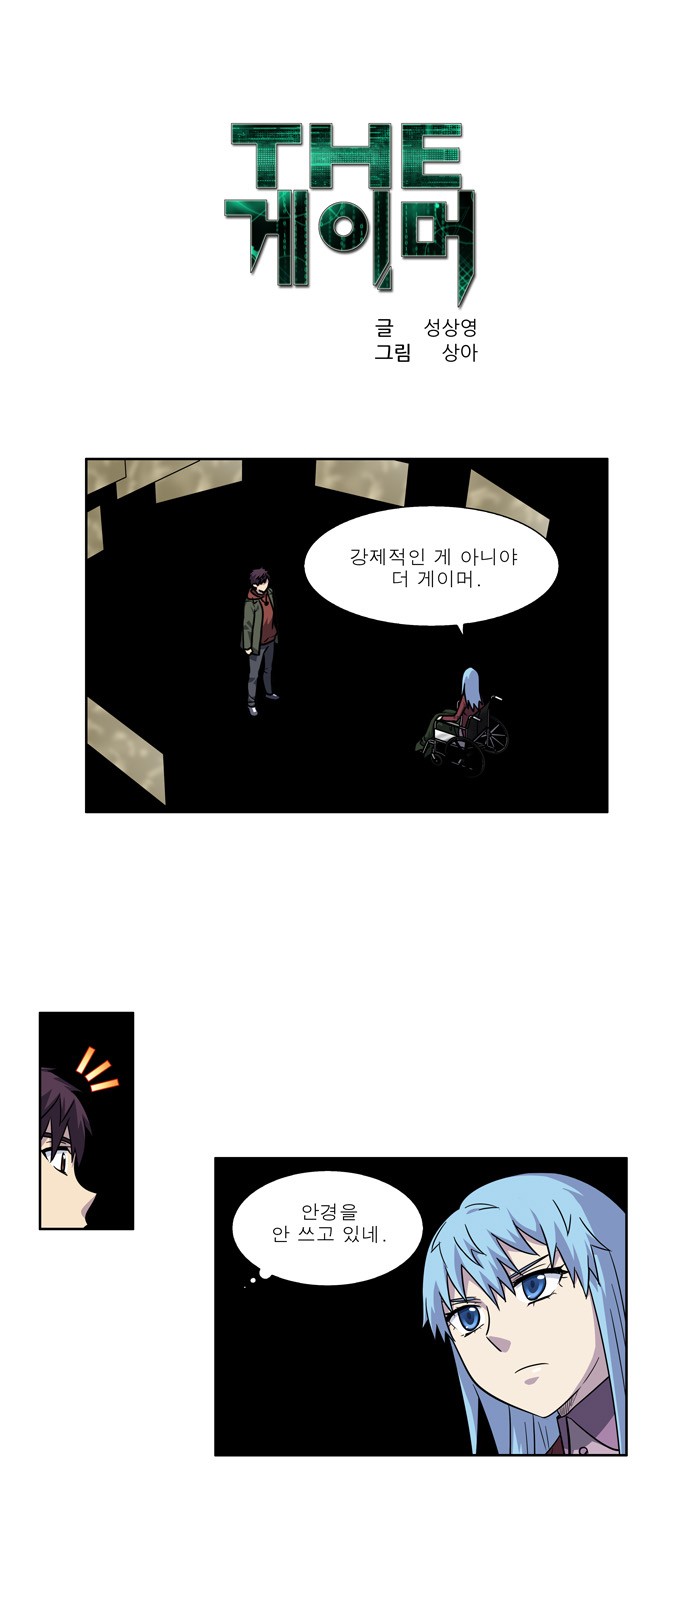 The Gamer - Chapter 227 - Page 1